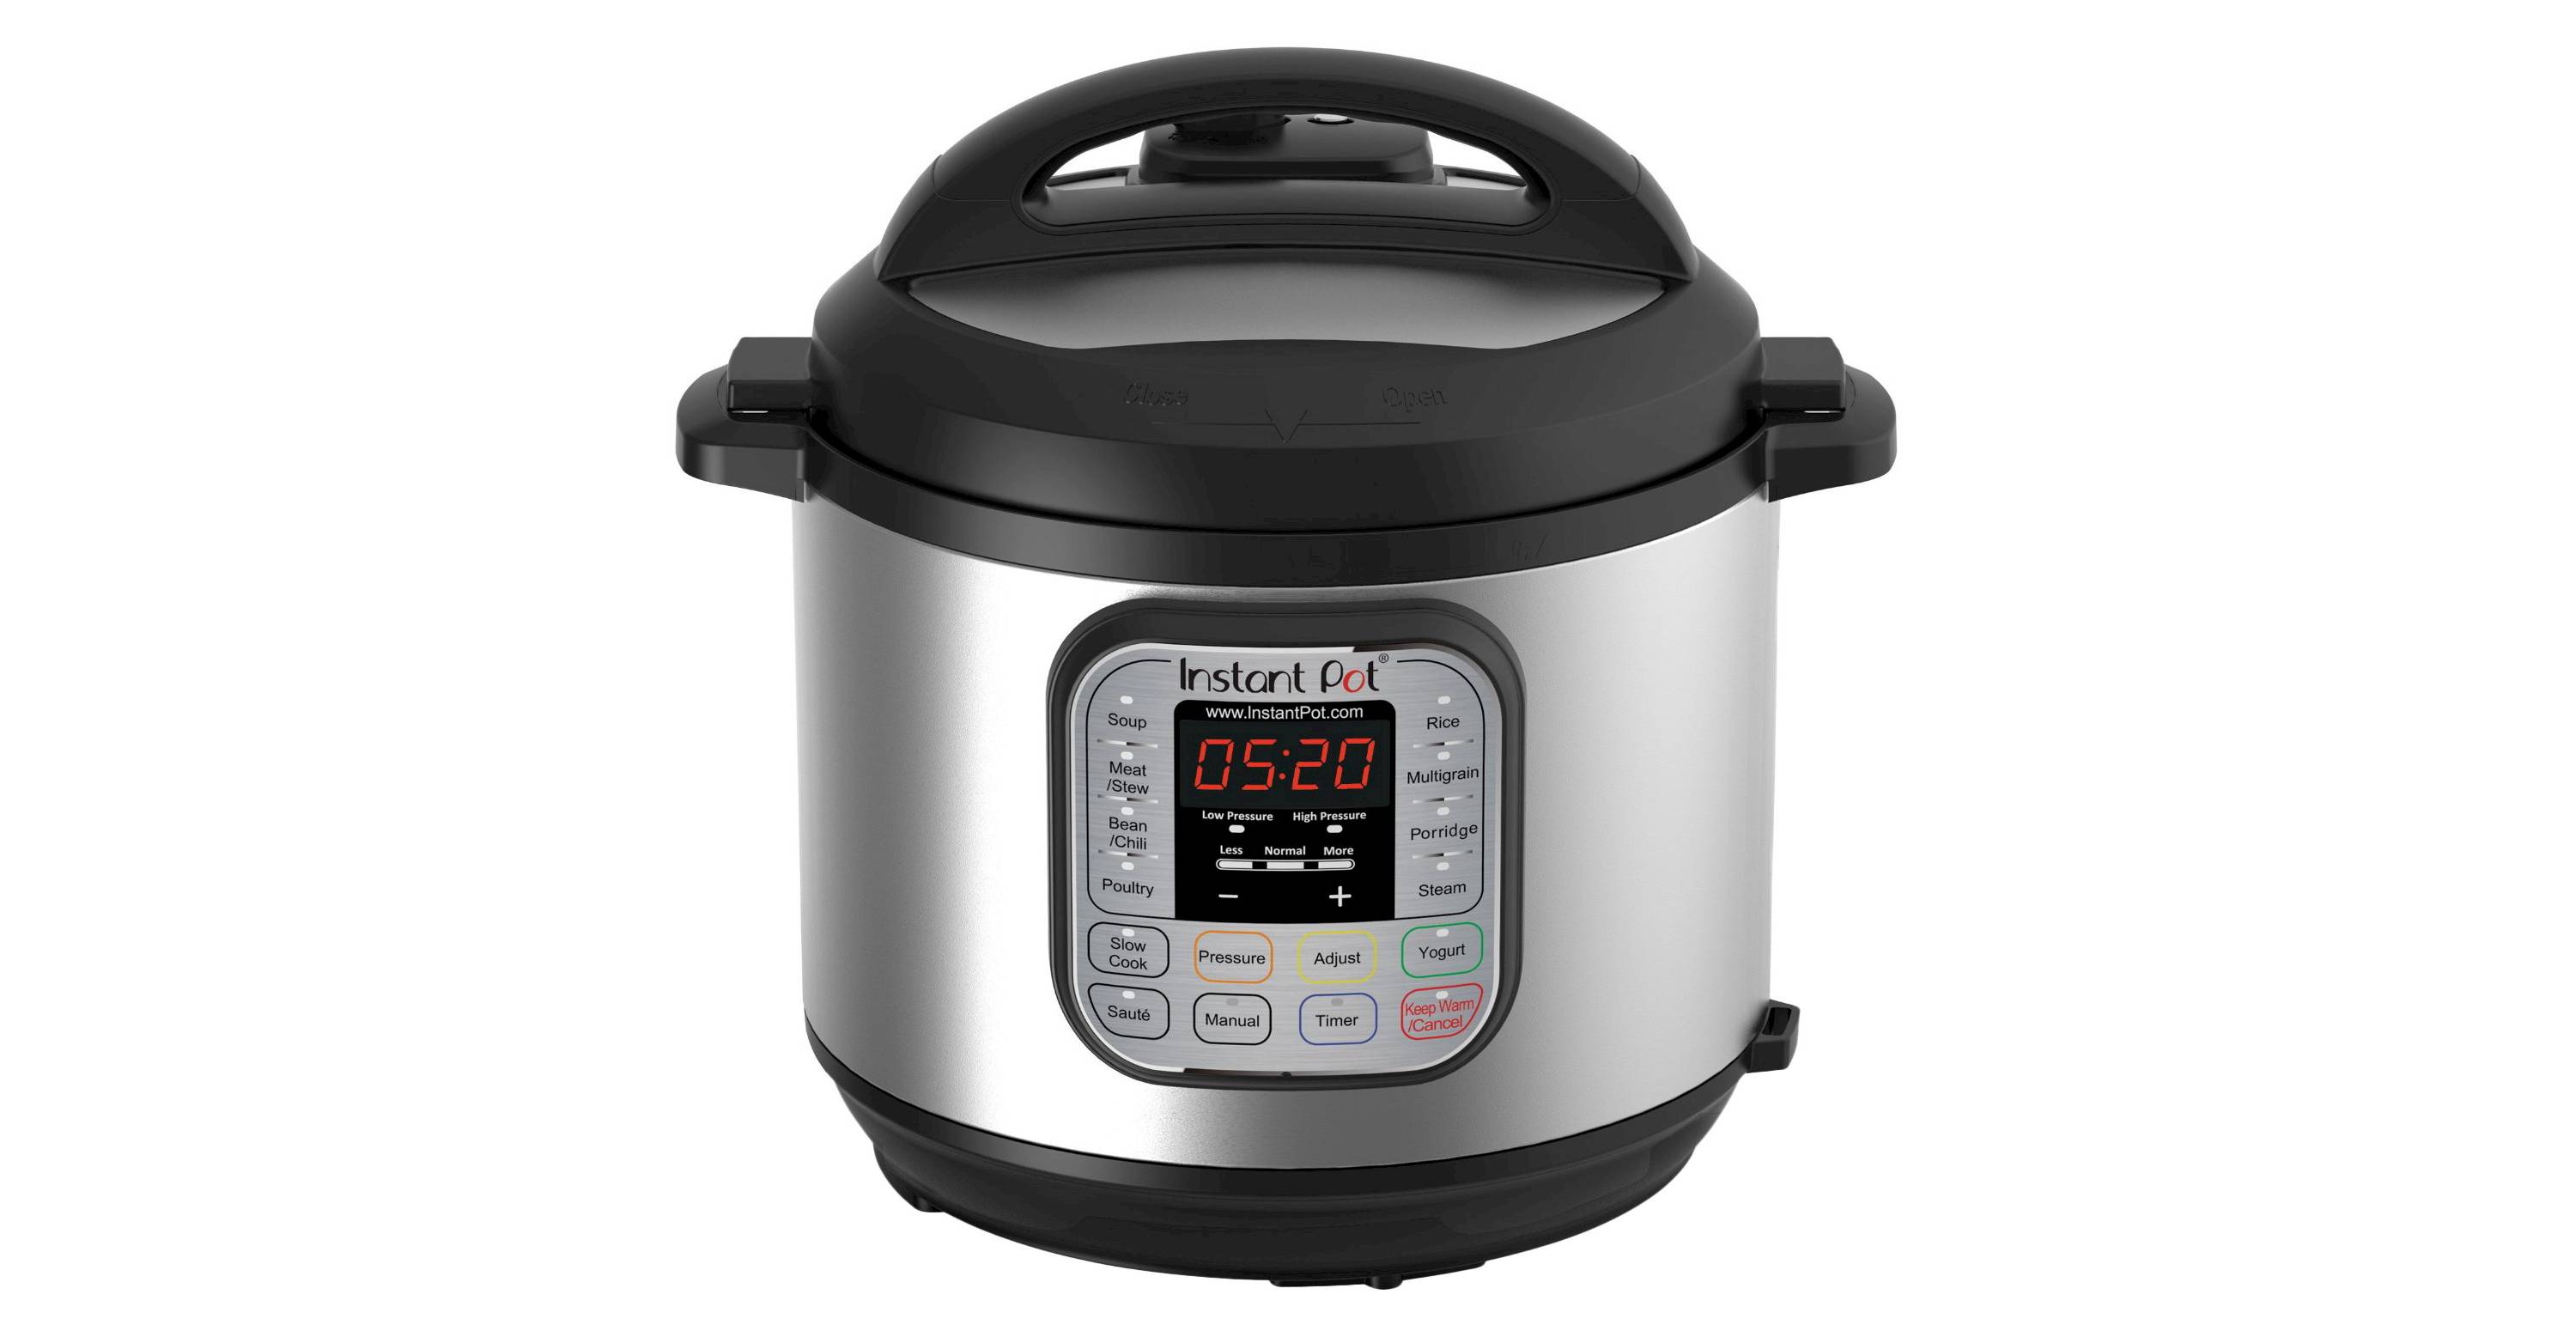 Instant Pot 7-in-1 pressure cooker for $100 plus $10 gift card